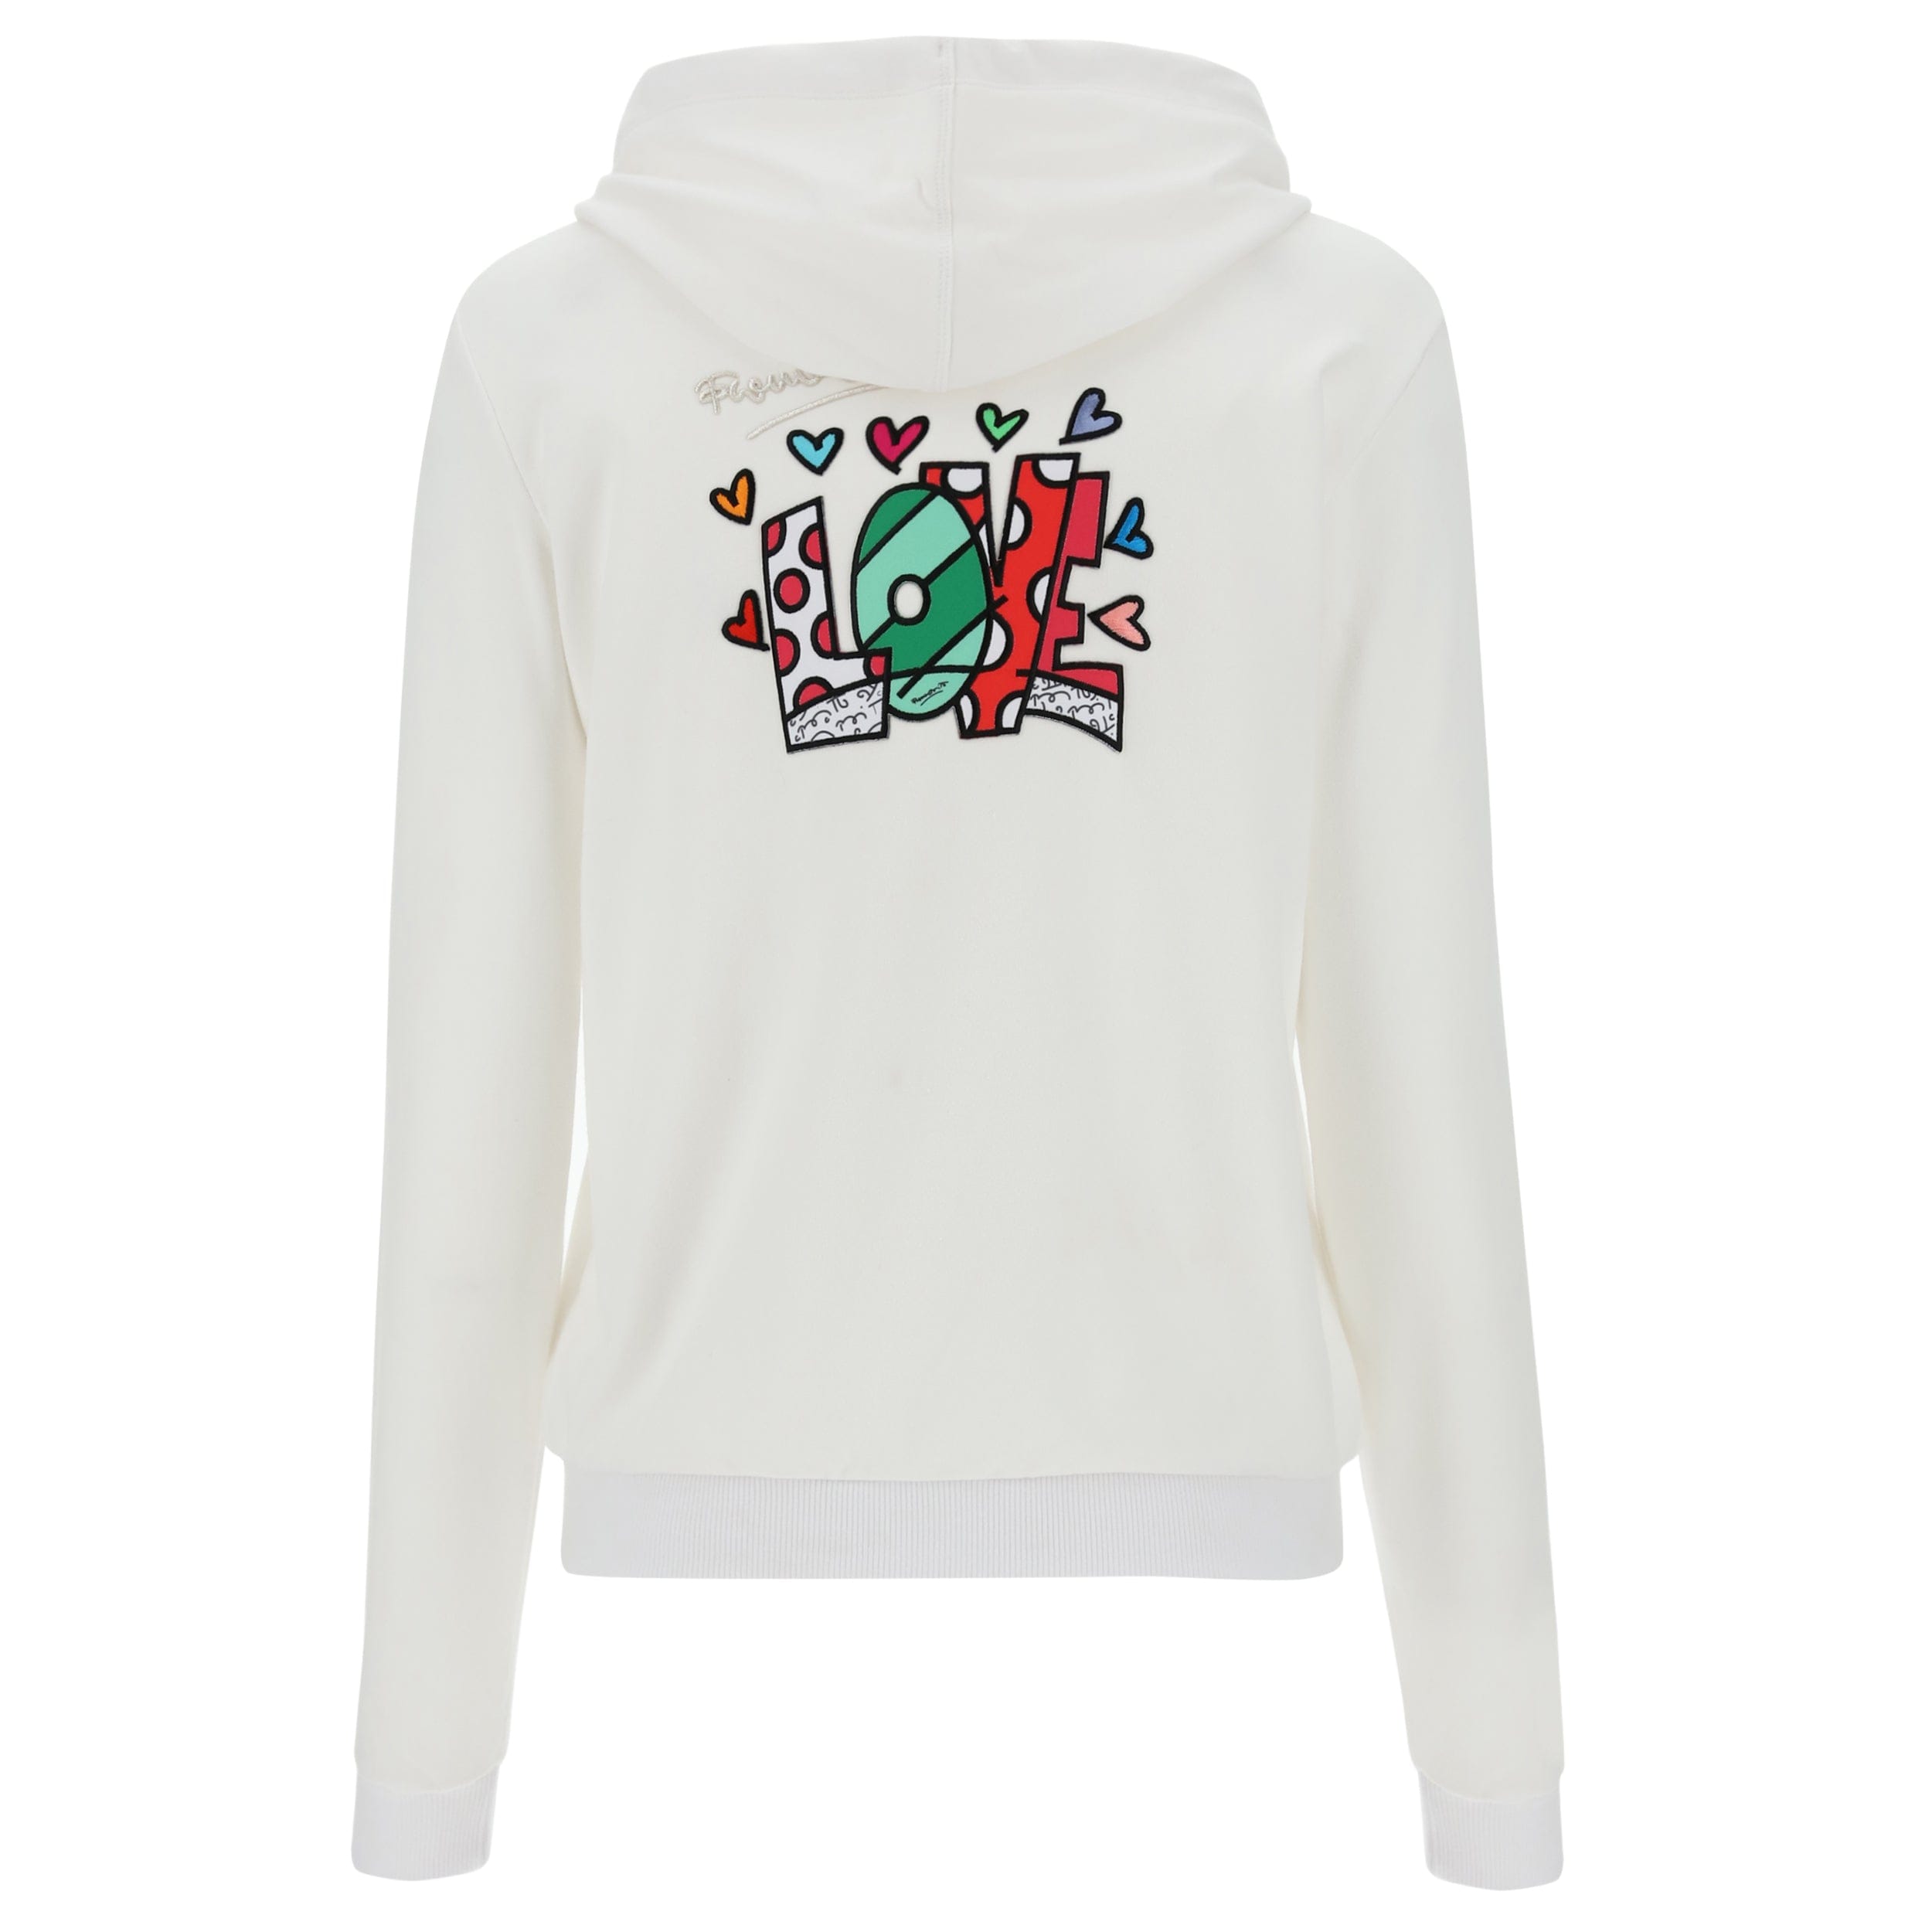 LOVE patch hoodie - Romero Britto Collection 2